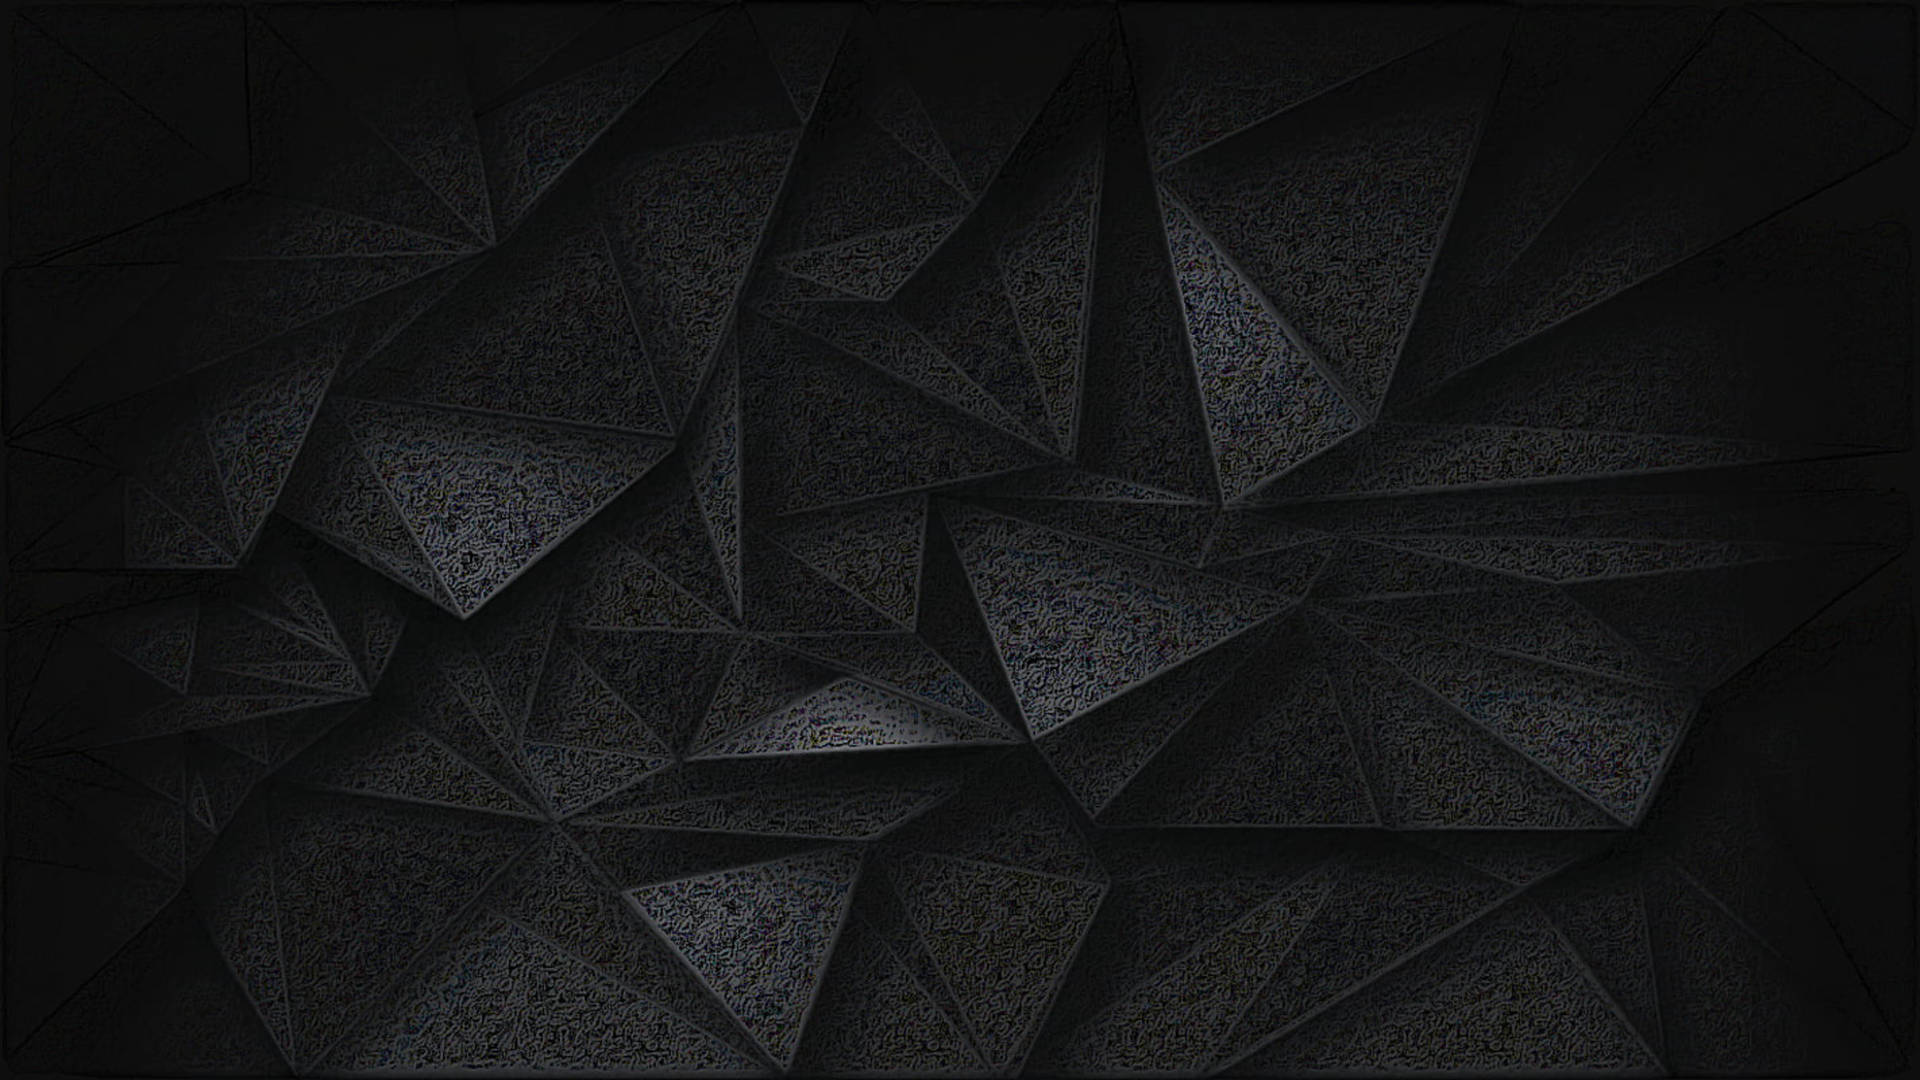 Textured Black Platonic Solid Abstract Wallpaper